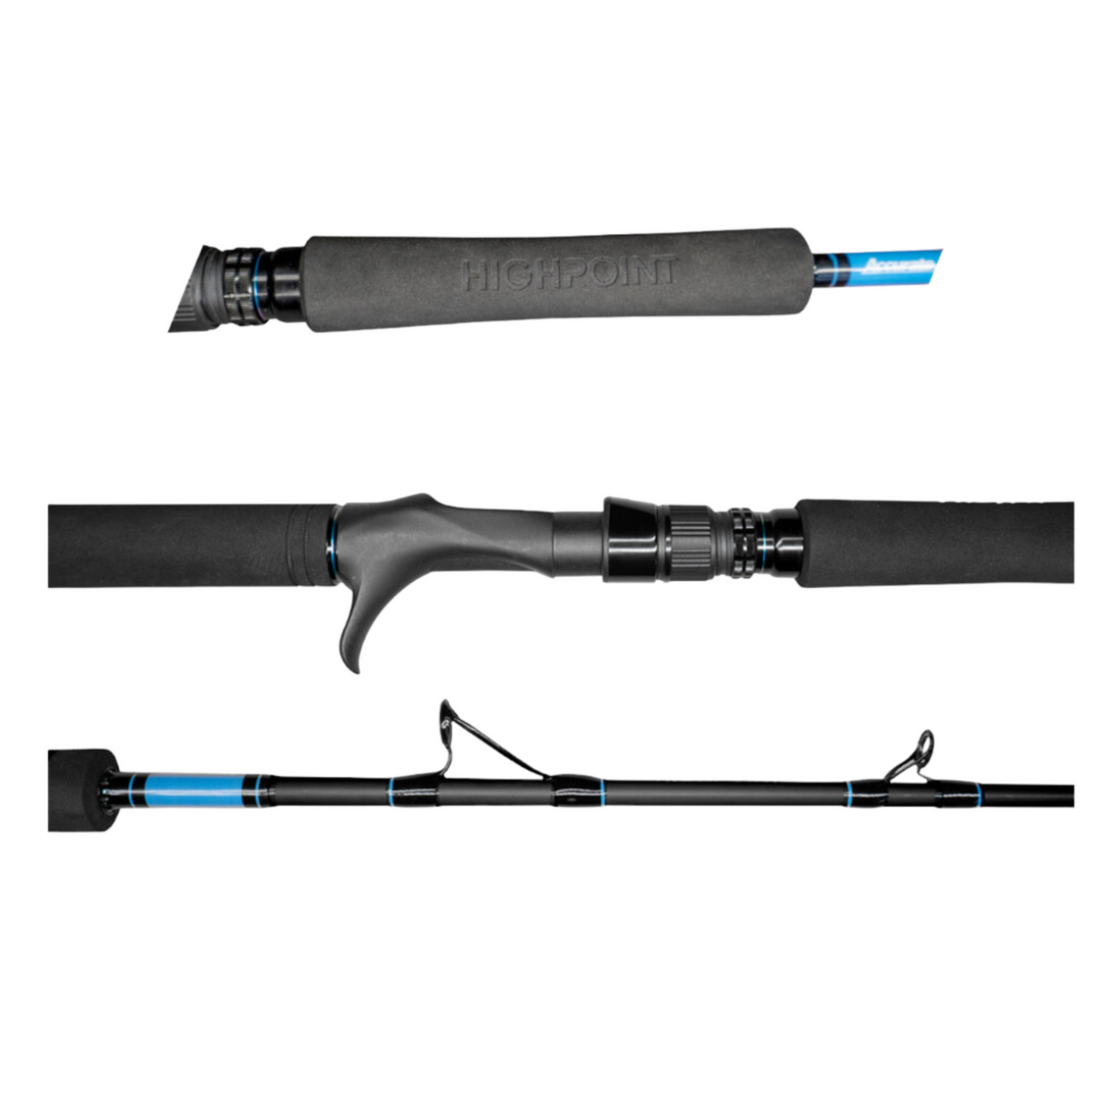 ACCURATE HIGHPOINT 521 JIG ROD